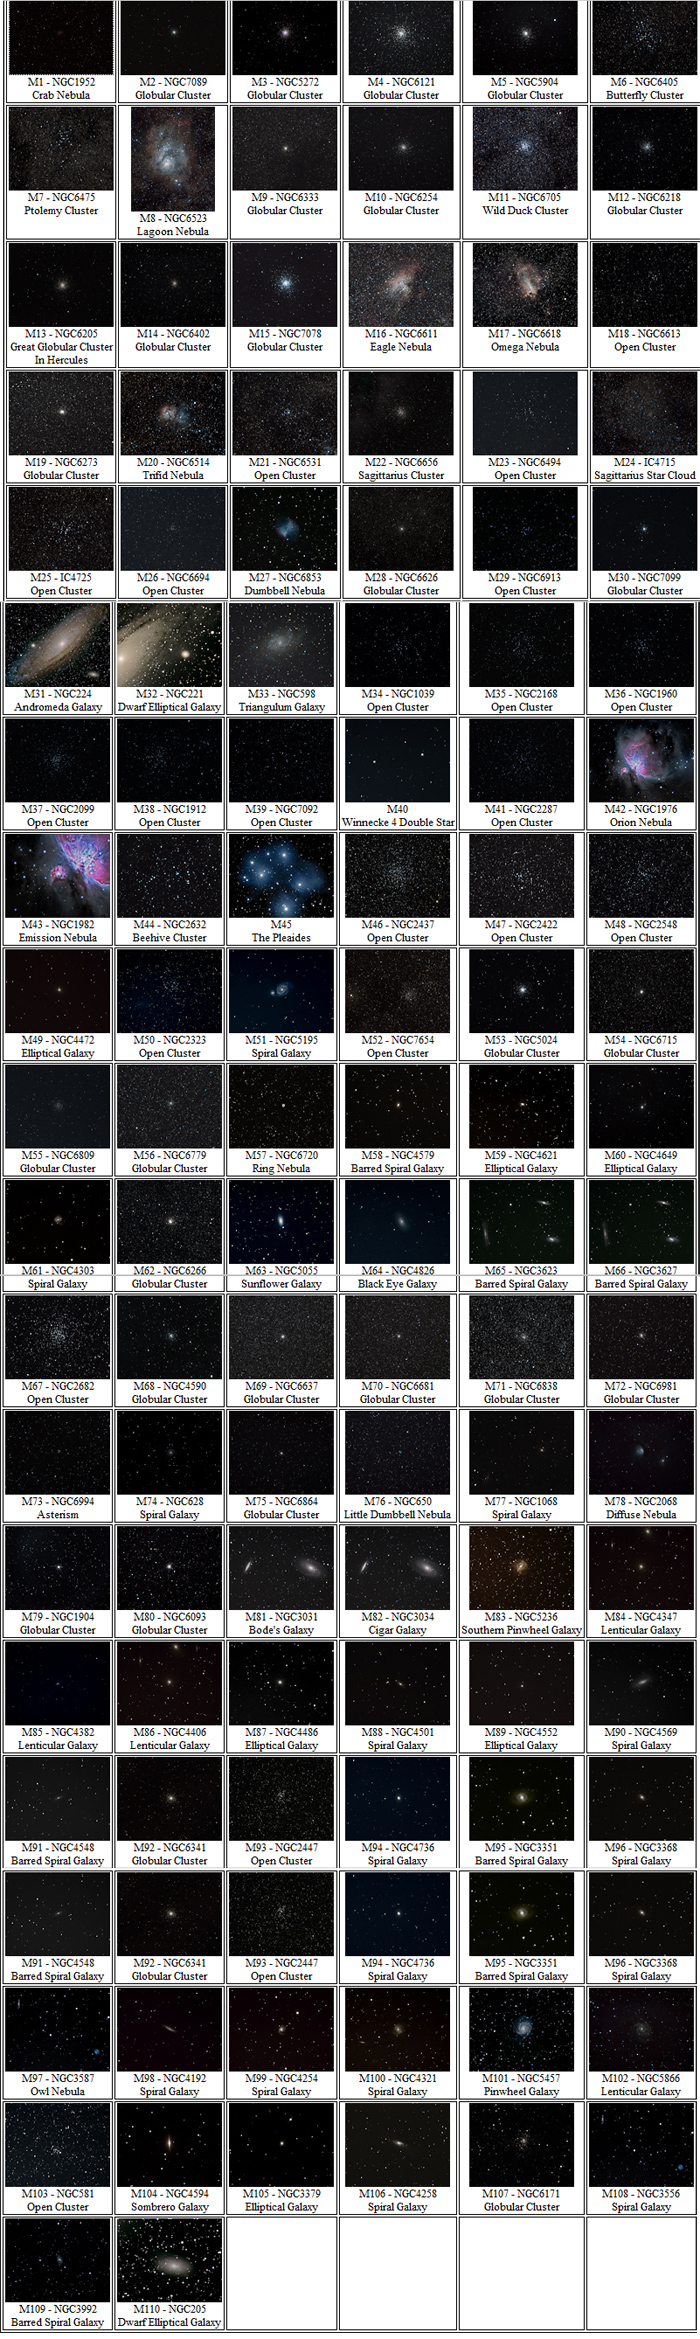 all 110 Messier objects